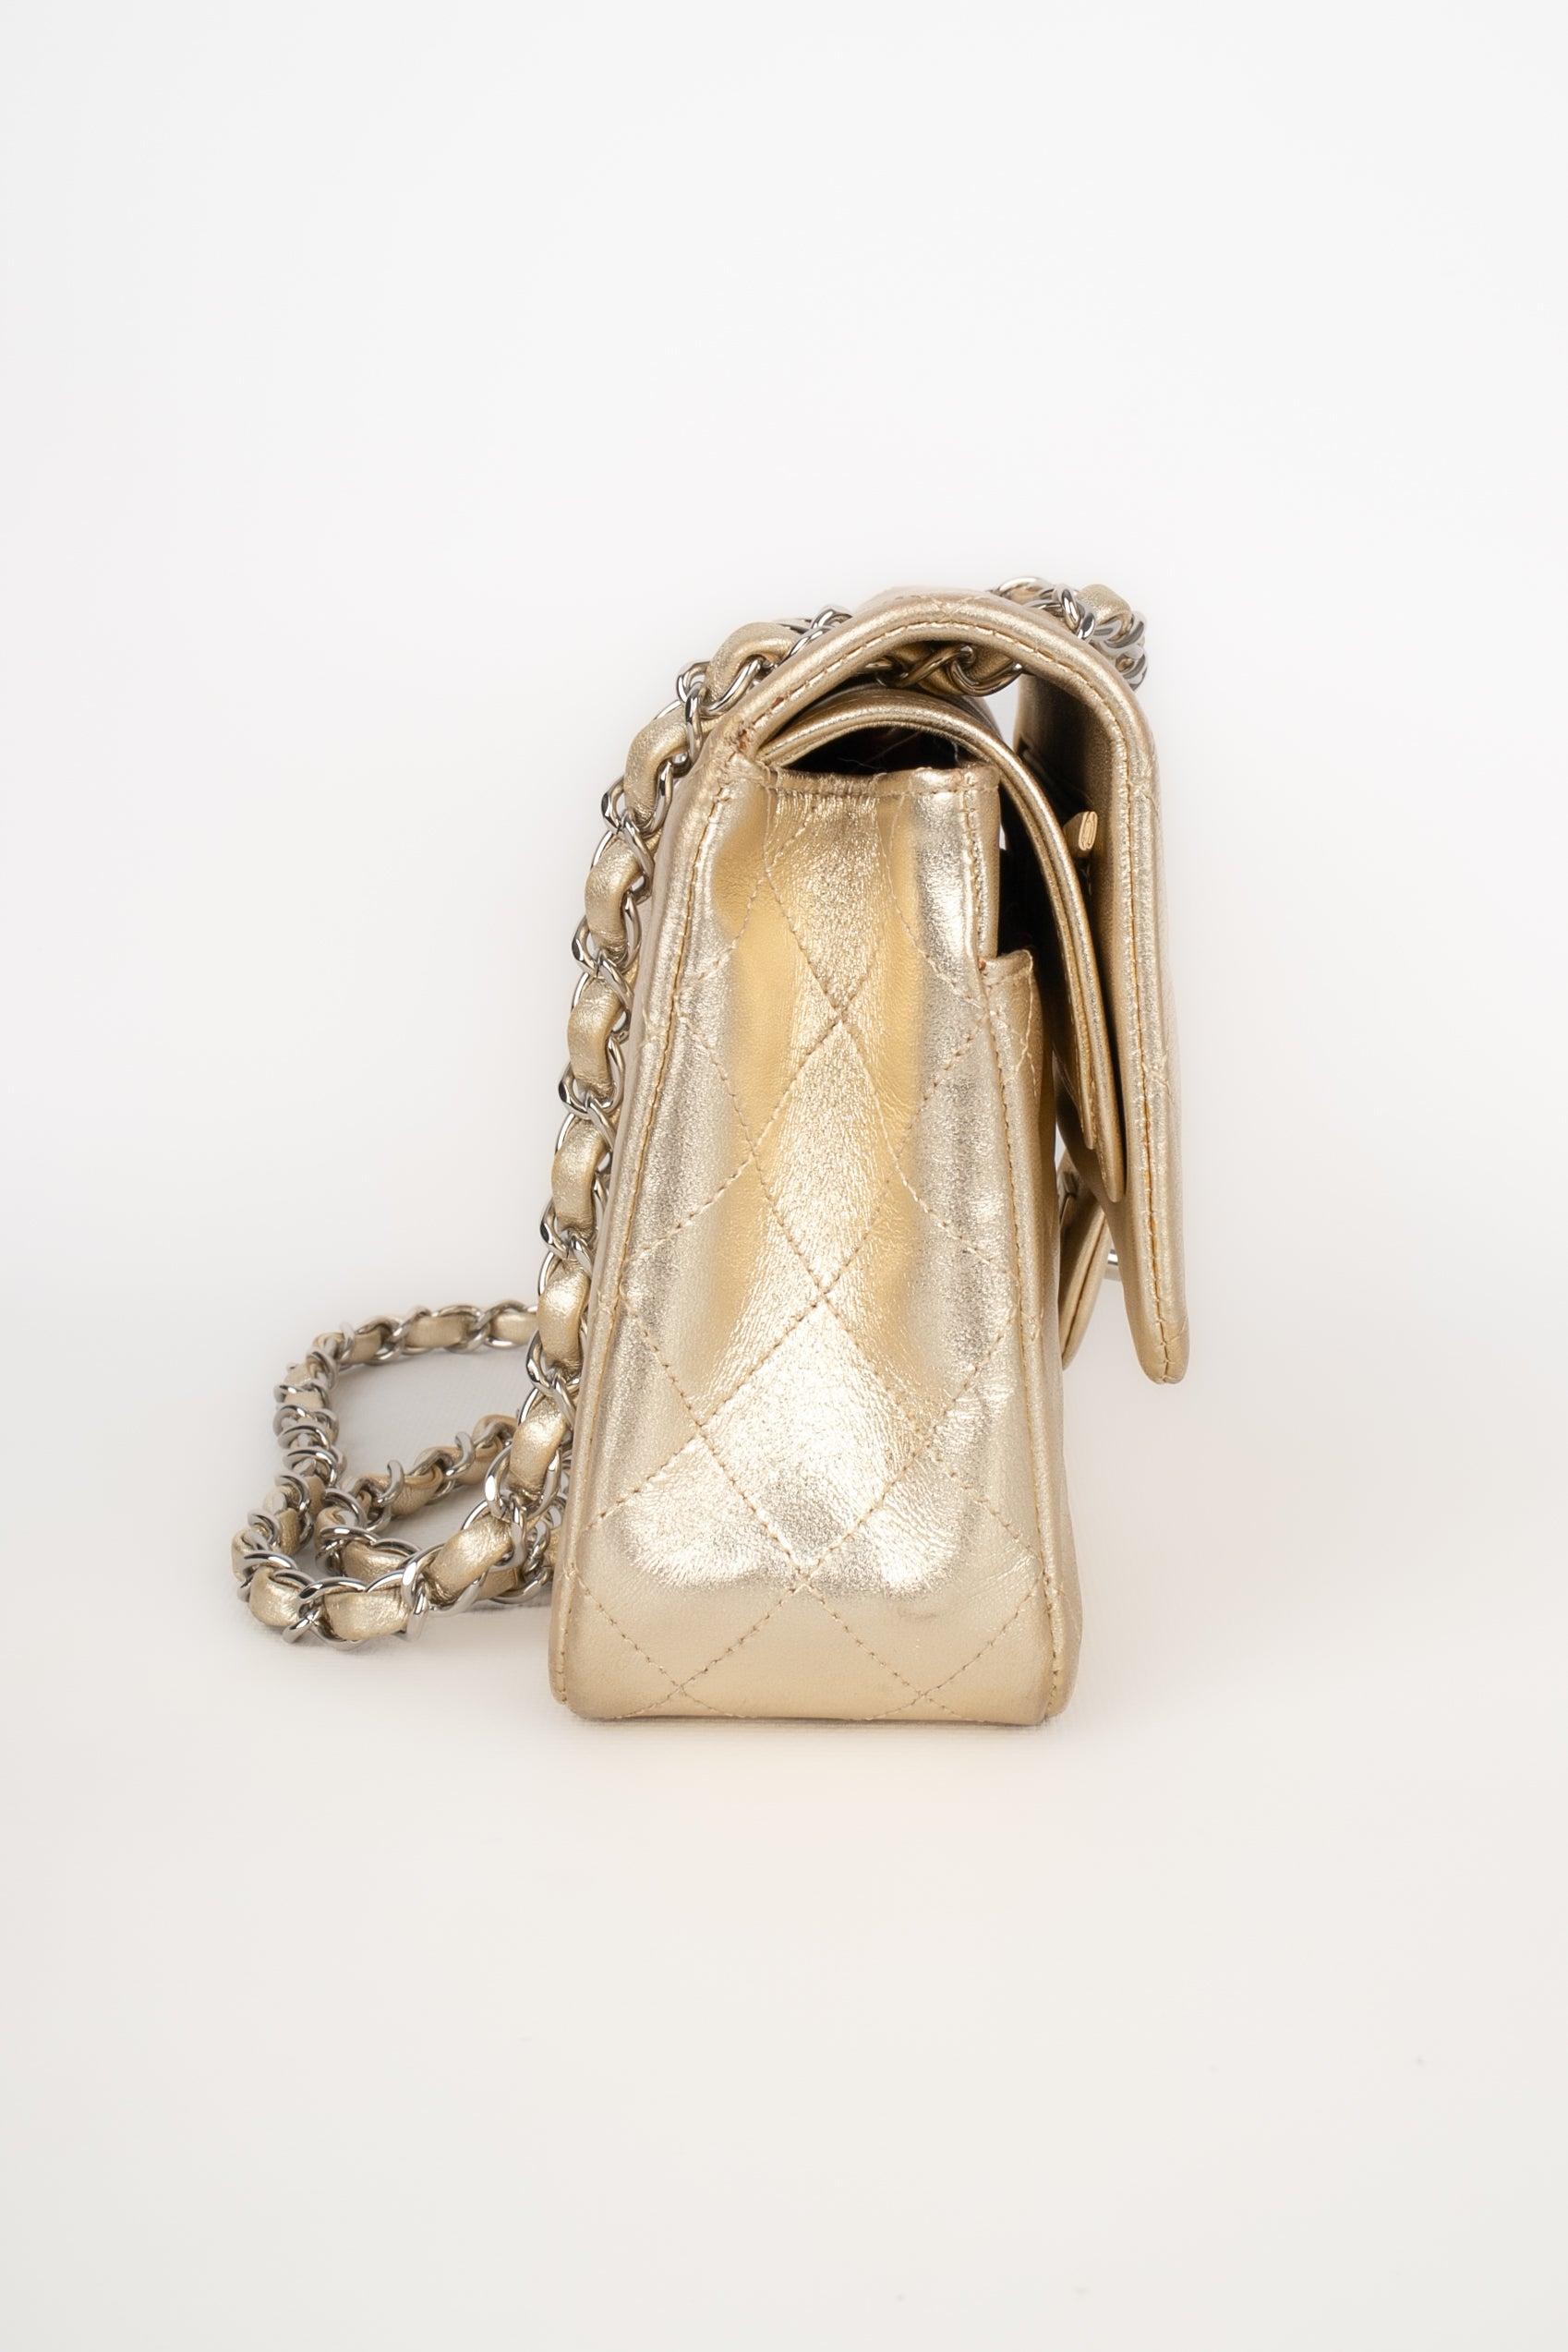 Women's Chanel Timeless Pale-Golden Metallic Lamb Leather Classic Bag, 2006/2008 For Sale